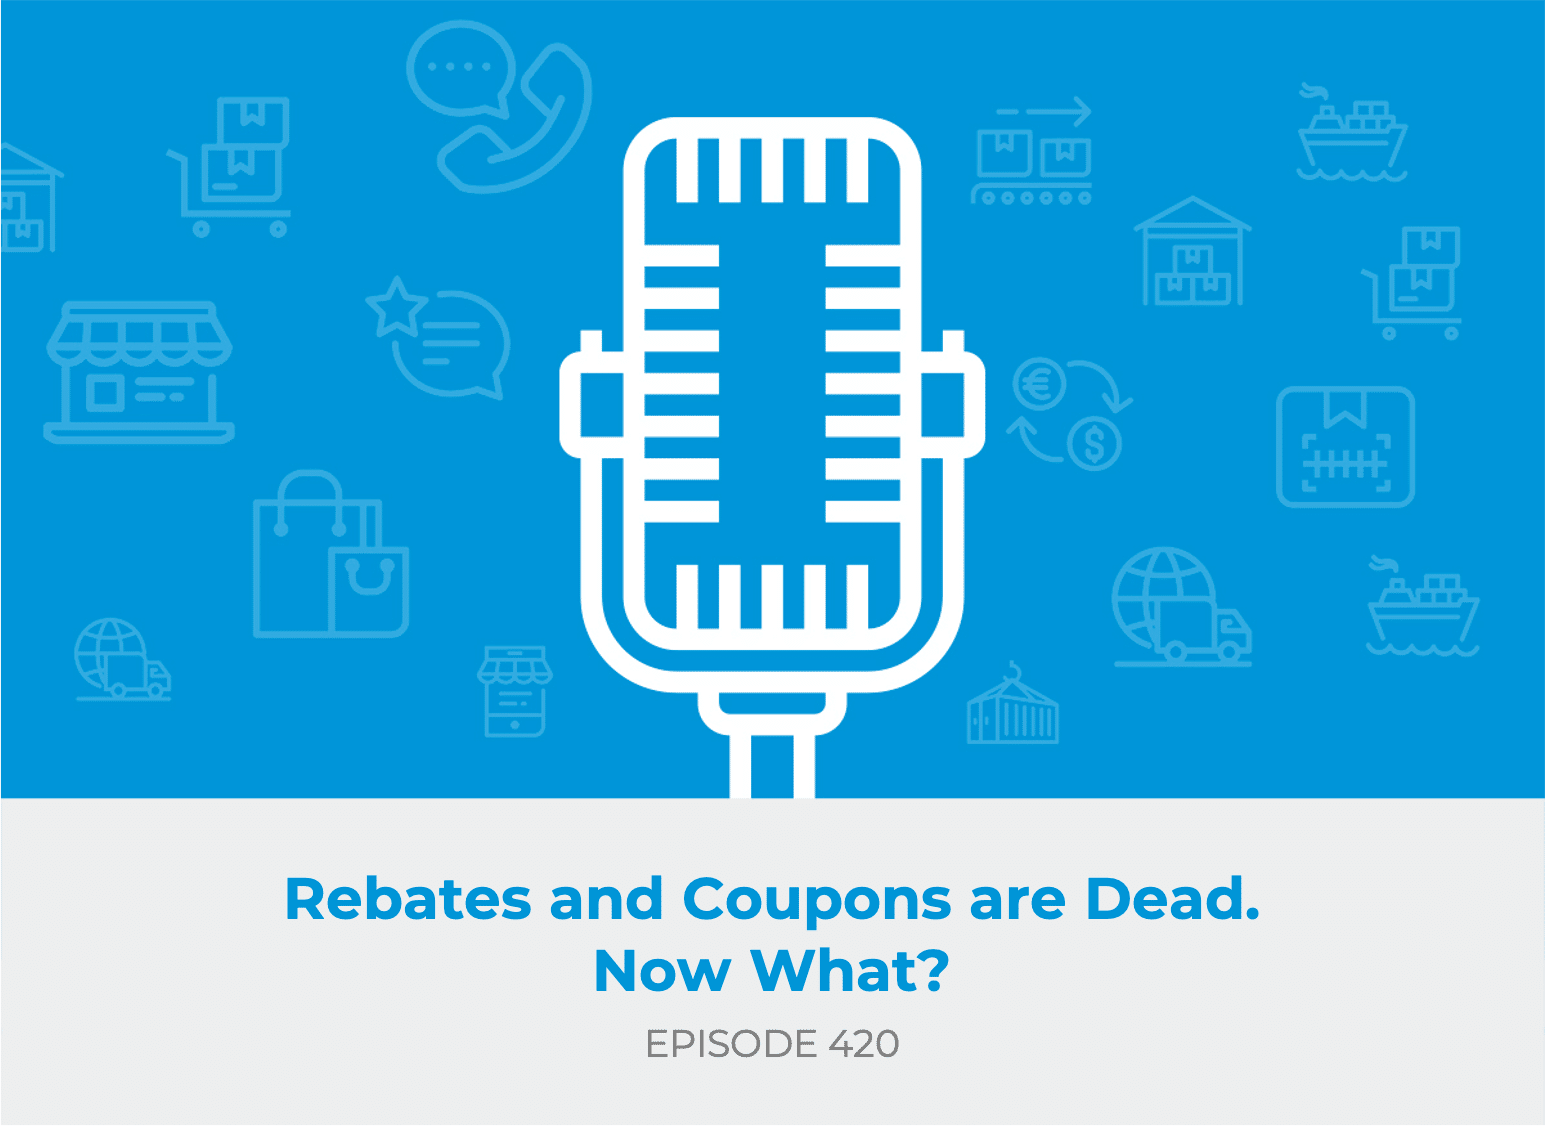 e420-rebates-and-coupons-are-dead-now-what